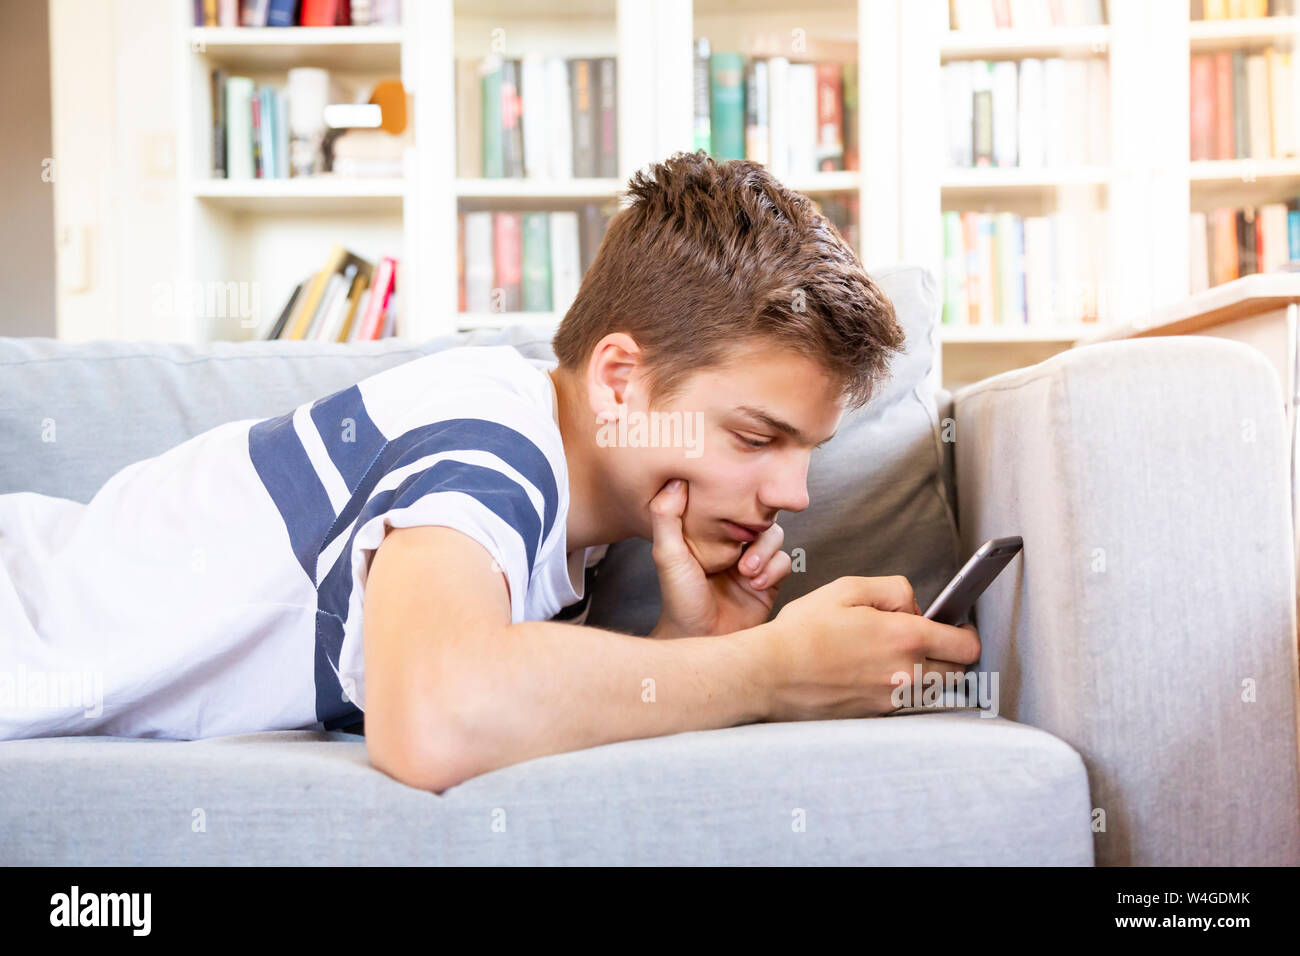 Teenage boy lying on the couch at home using cell phone Stock Photo